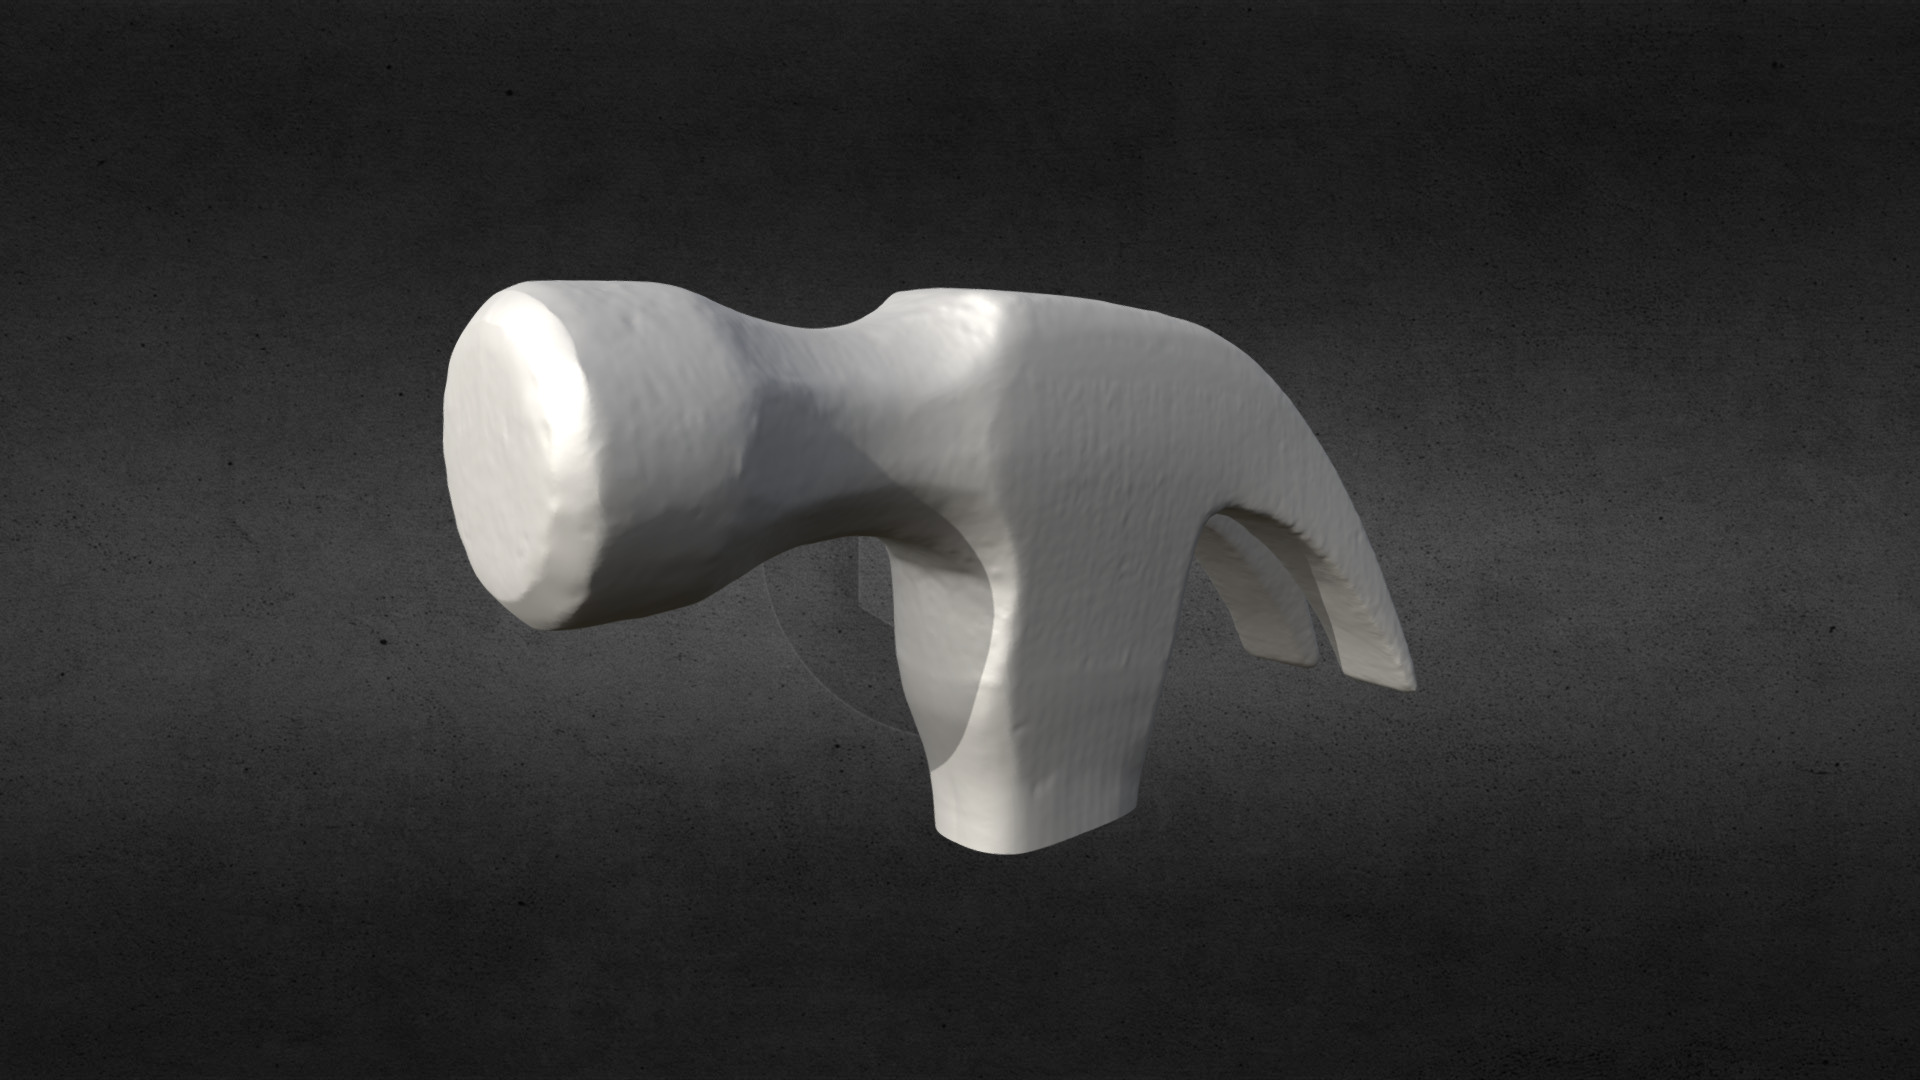 3D model 3D Scanned Hammer Head (3D Printable) - This is a 3D model of the 3D Scanned Hammer Head (3D Printable). The 3D model is about a white garlic on a black surface.